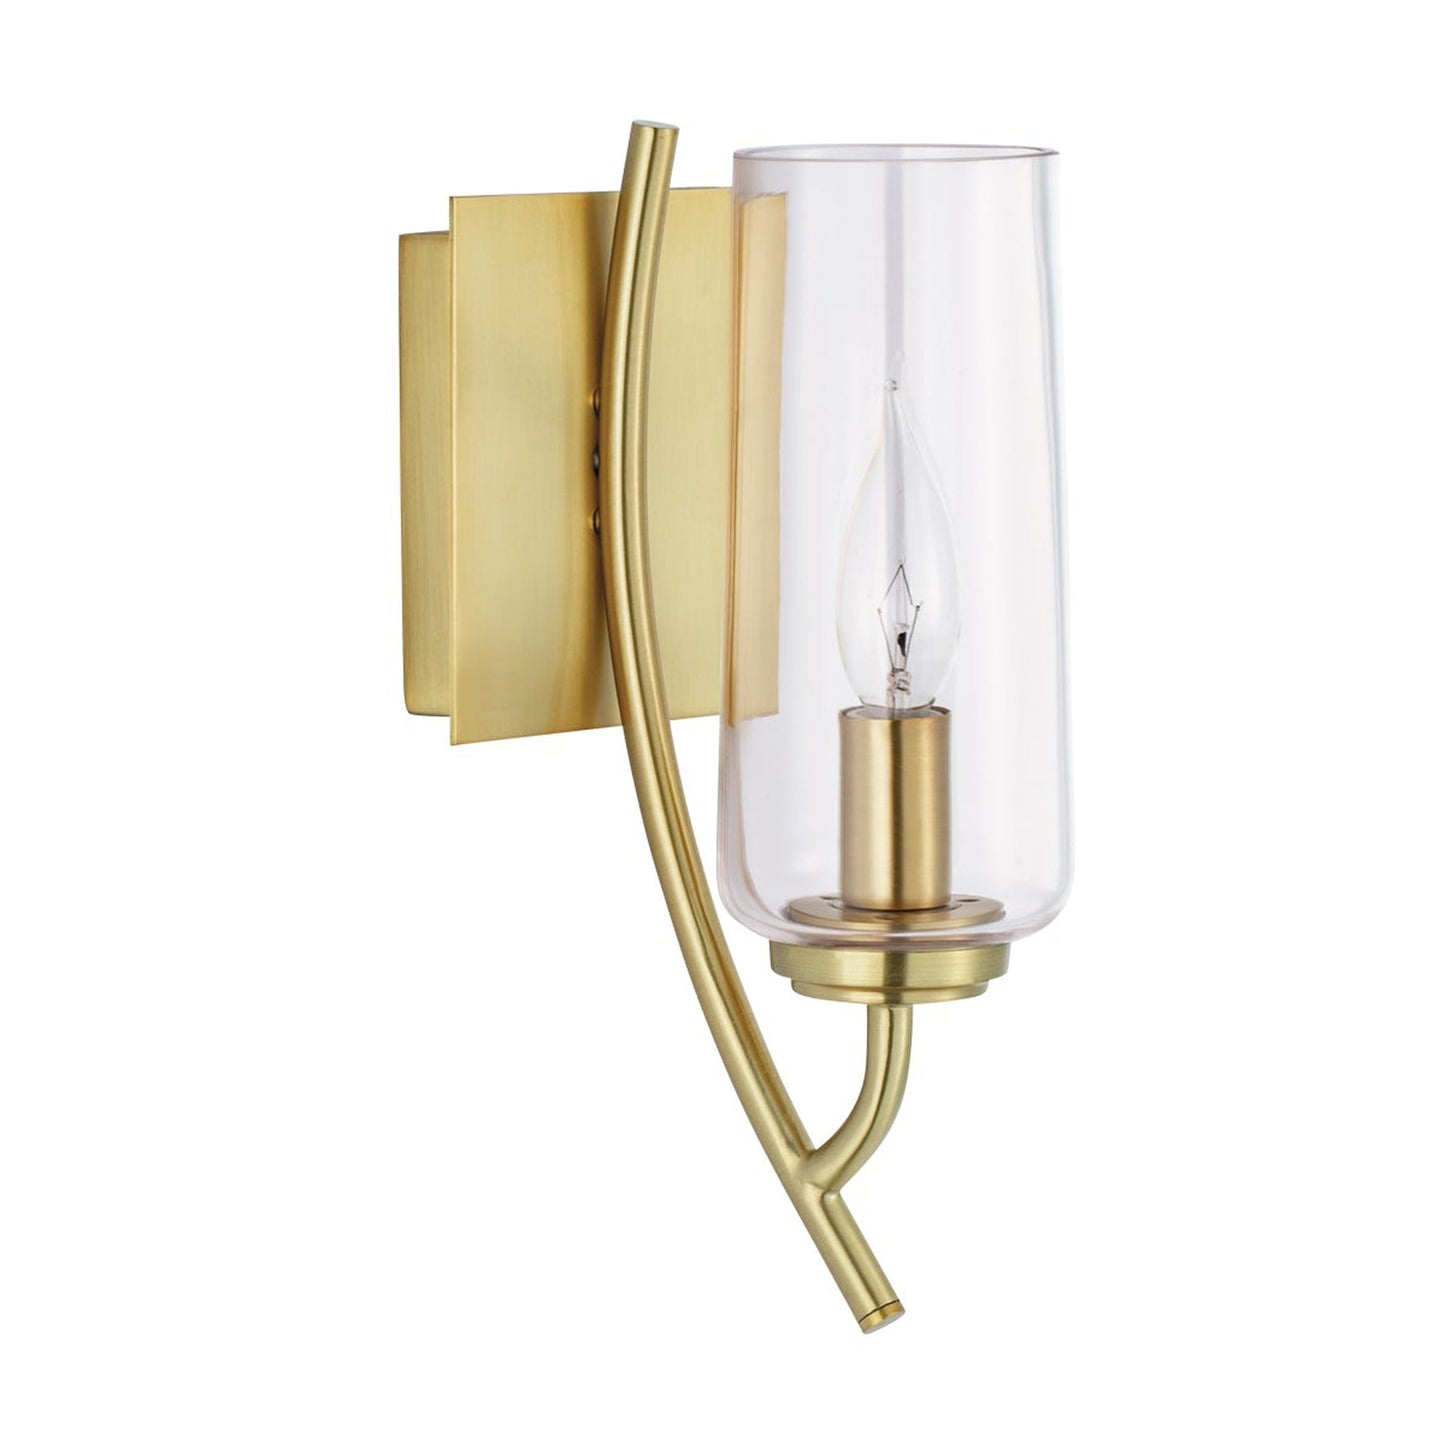 Norwell Lighting Tulip 12" x 5" 1-Light Sconce Satin Brass Indoor Wall Light With Clear Glass Diffuser